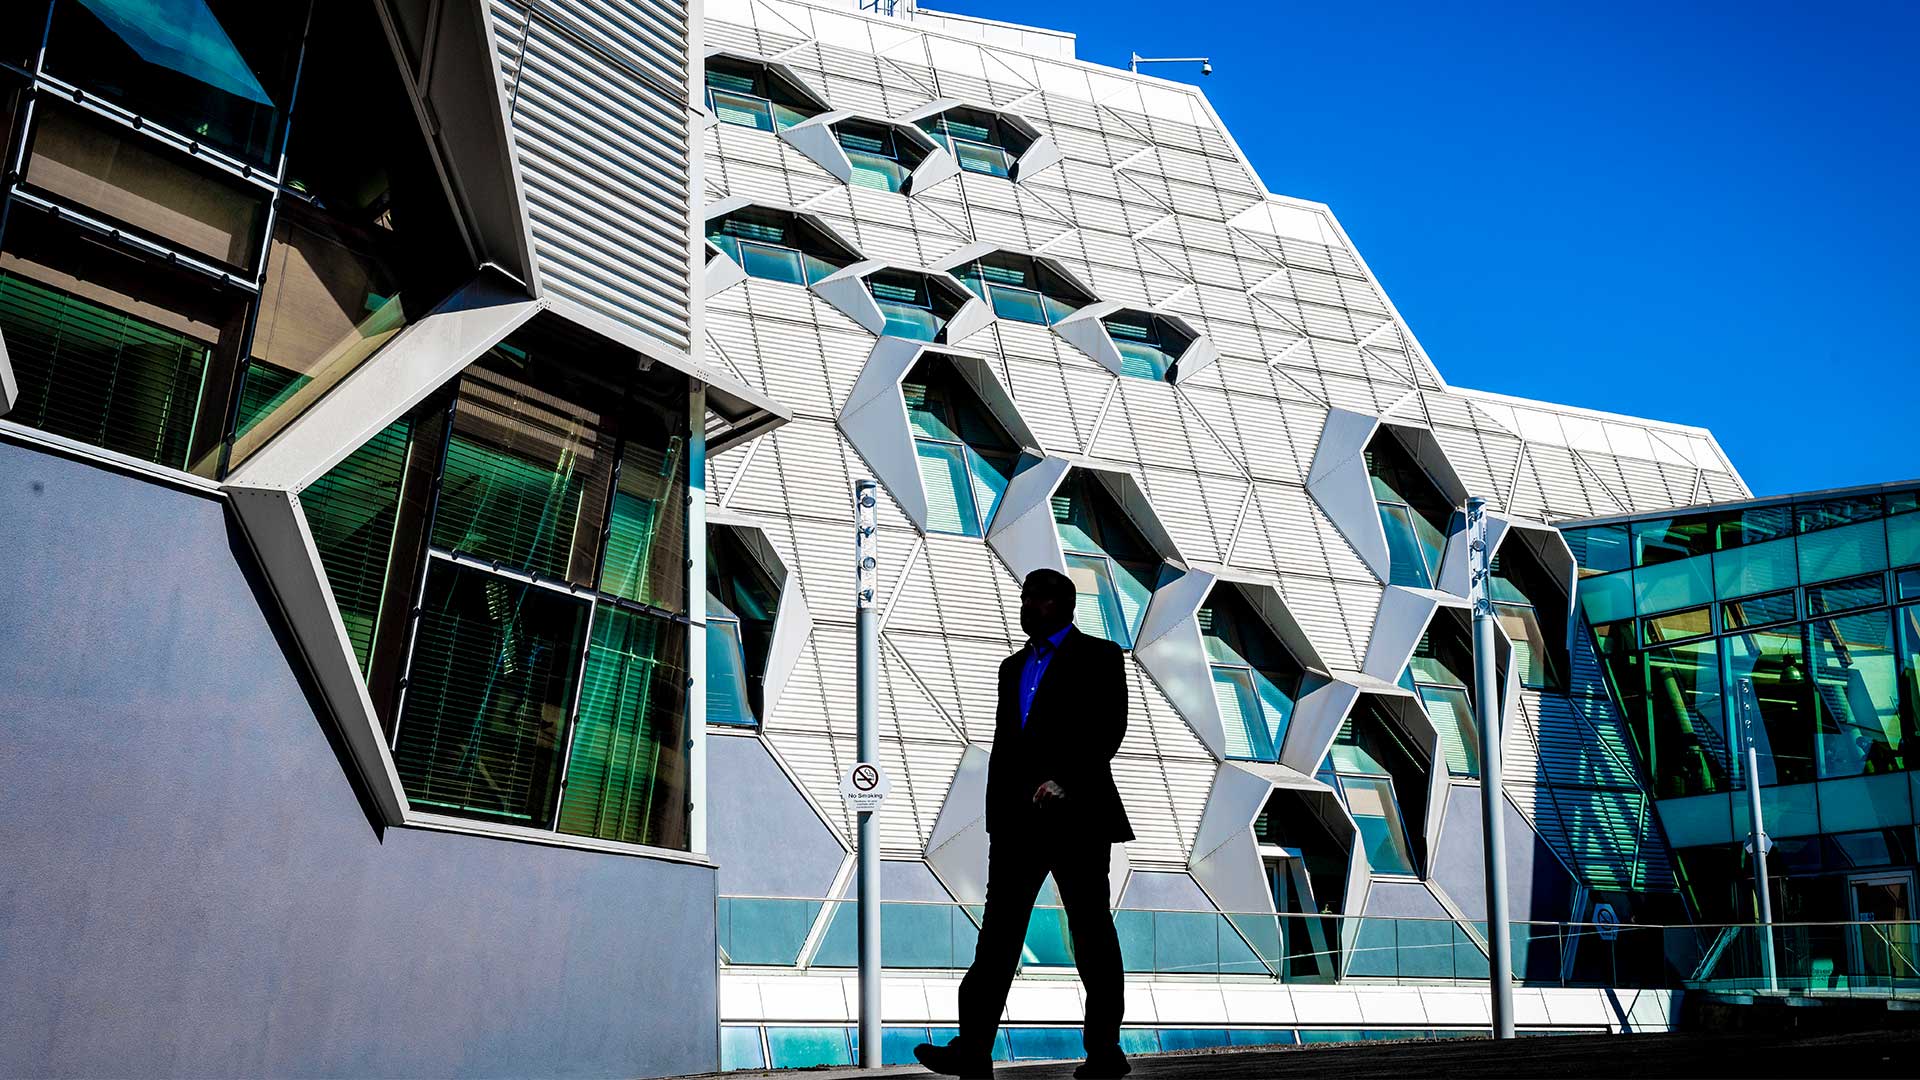 A silhouetted person walking past a modern architecture building wearing a suit